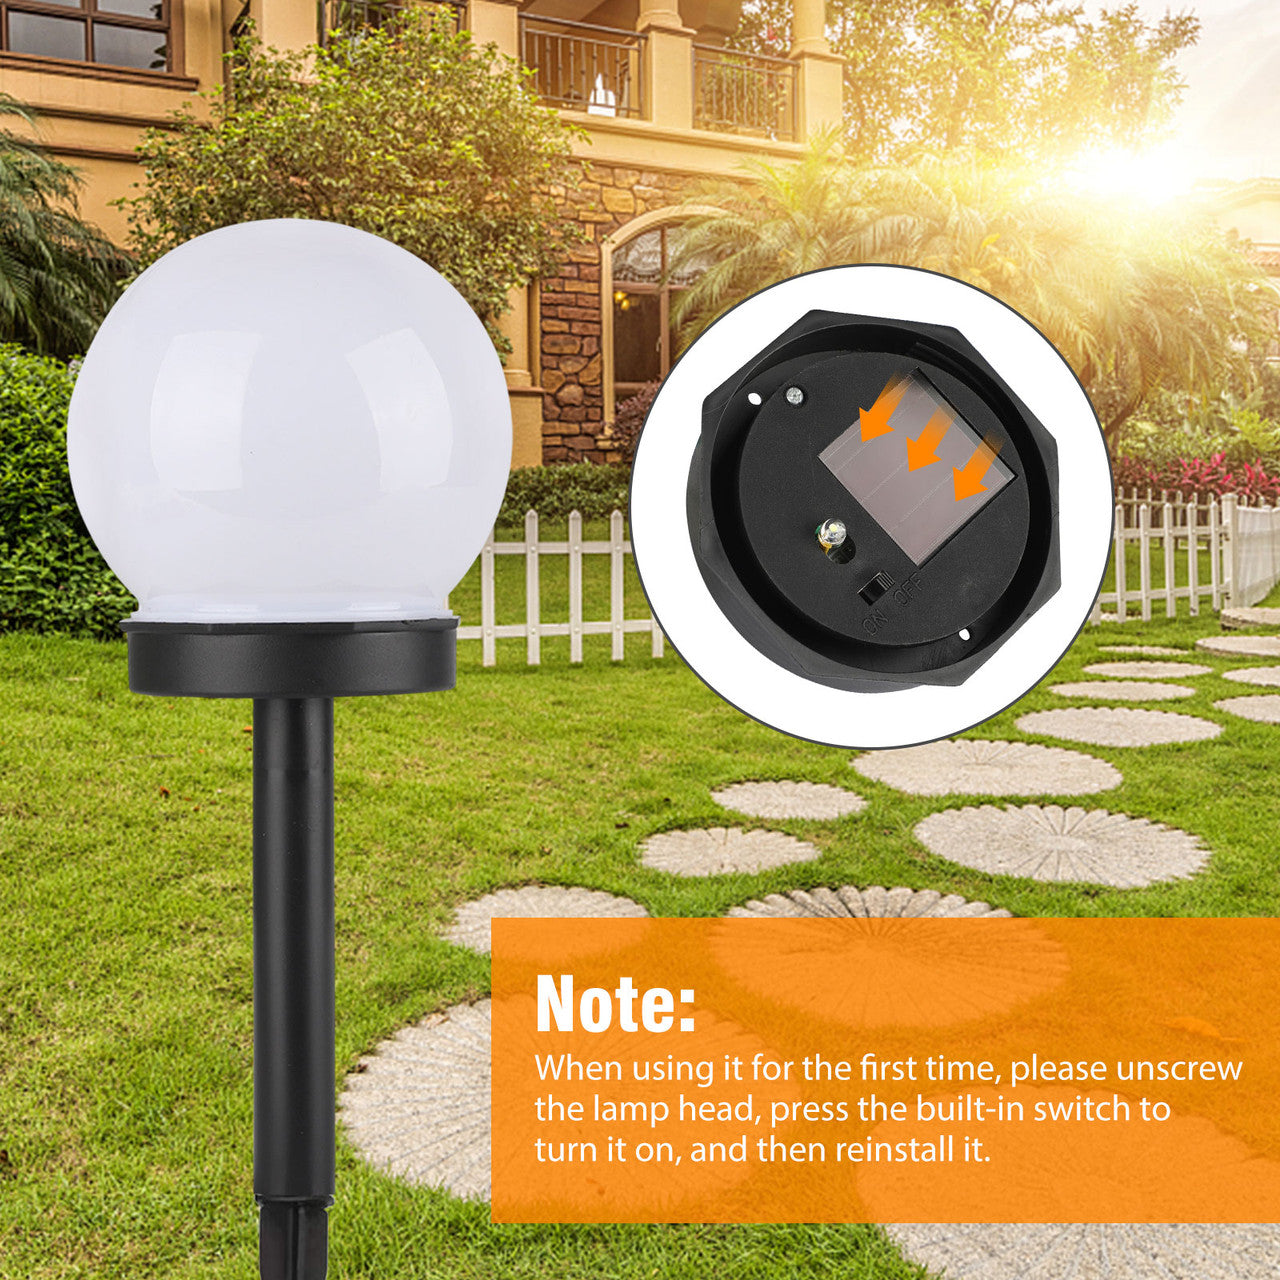 Outdoor Solar Lights Ball Lamp, IP55 Waterproof LED Path Light with Auto On/Off Light Sensor, Solar Landscape Lighting for Yard Patio Walkway Pathway Outdoor Garden Path (White), 4Pcs